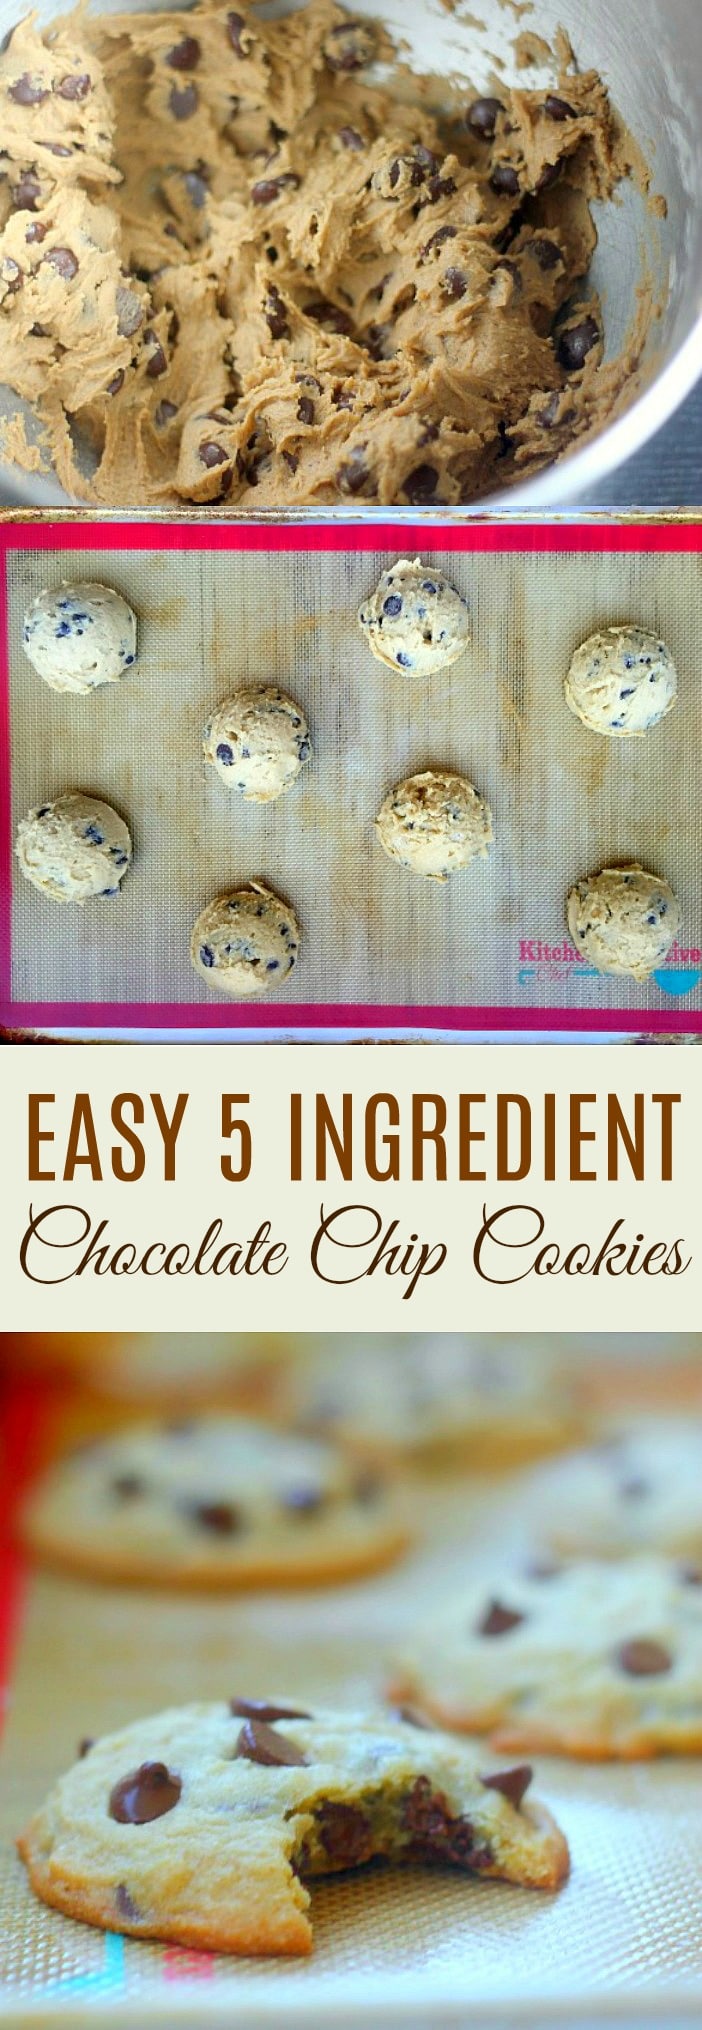 Easy 5 Ingredient Chocolate Chip Cookie Recipe